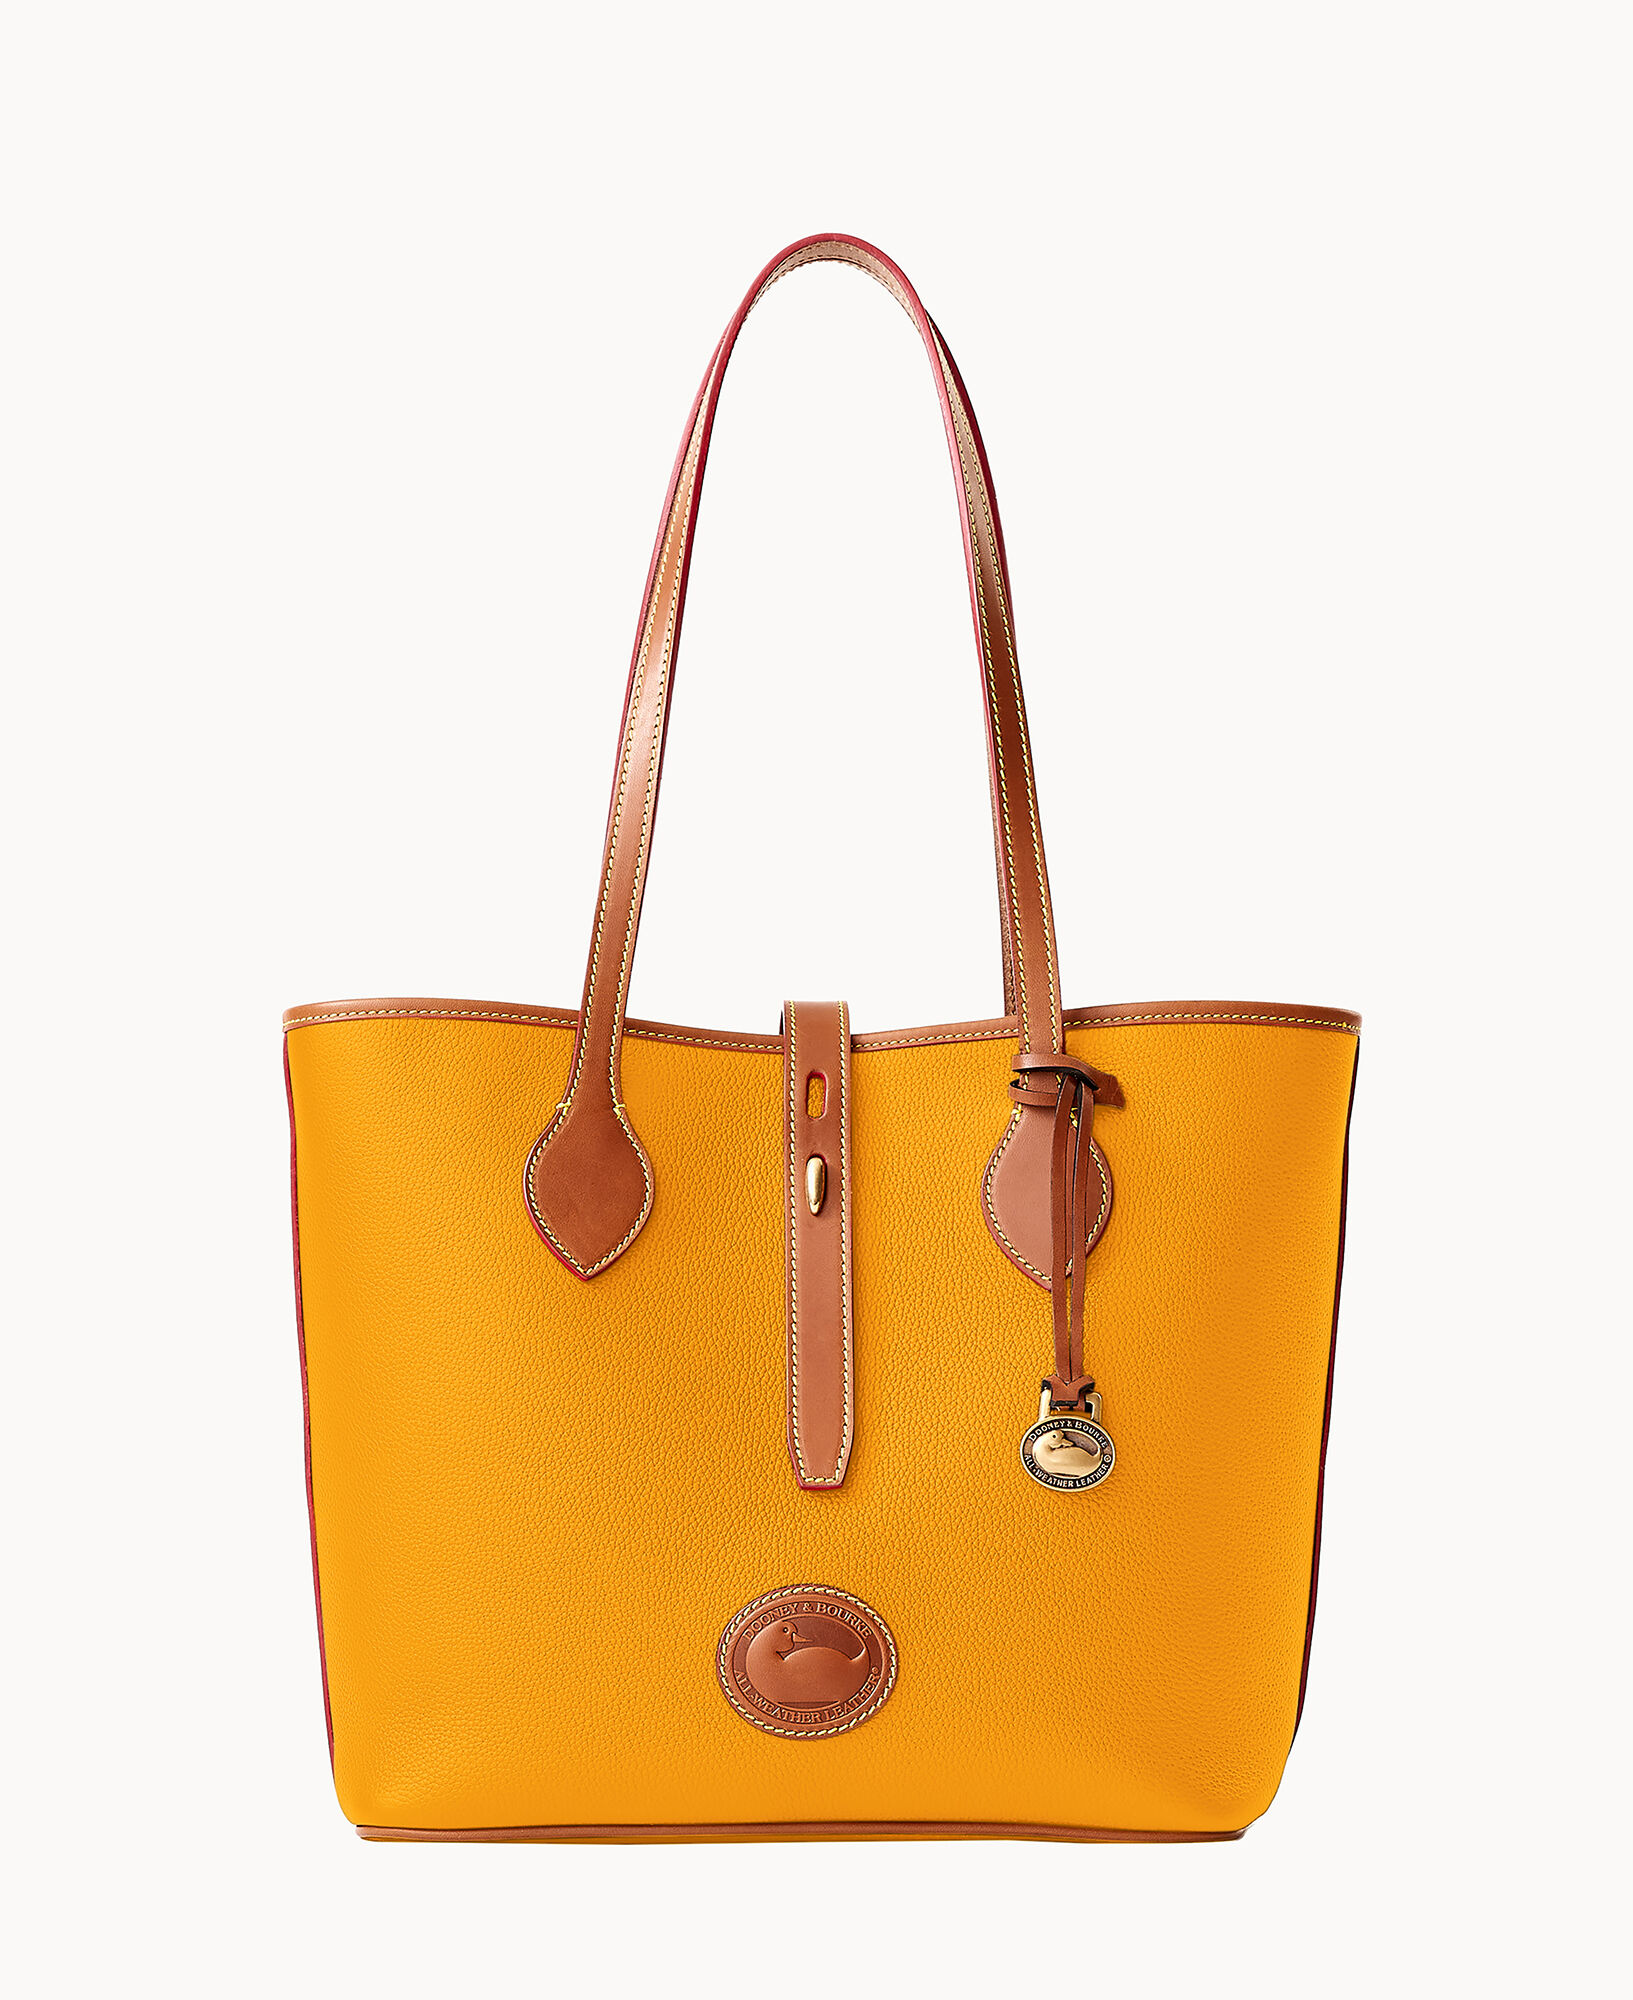 Dooney & Bourke 3.0 All Weather Leather Tote